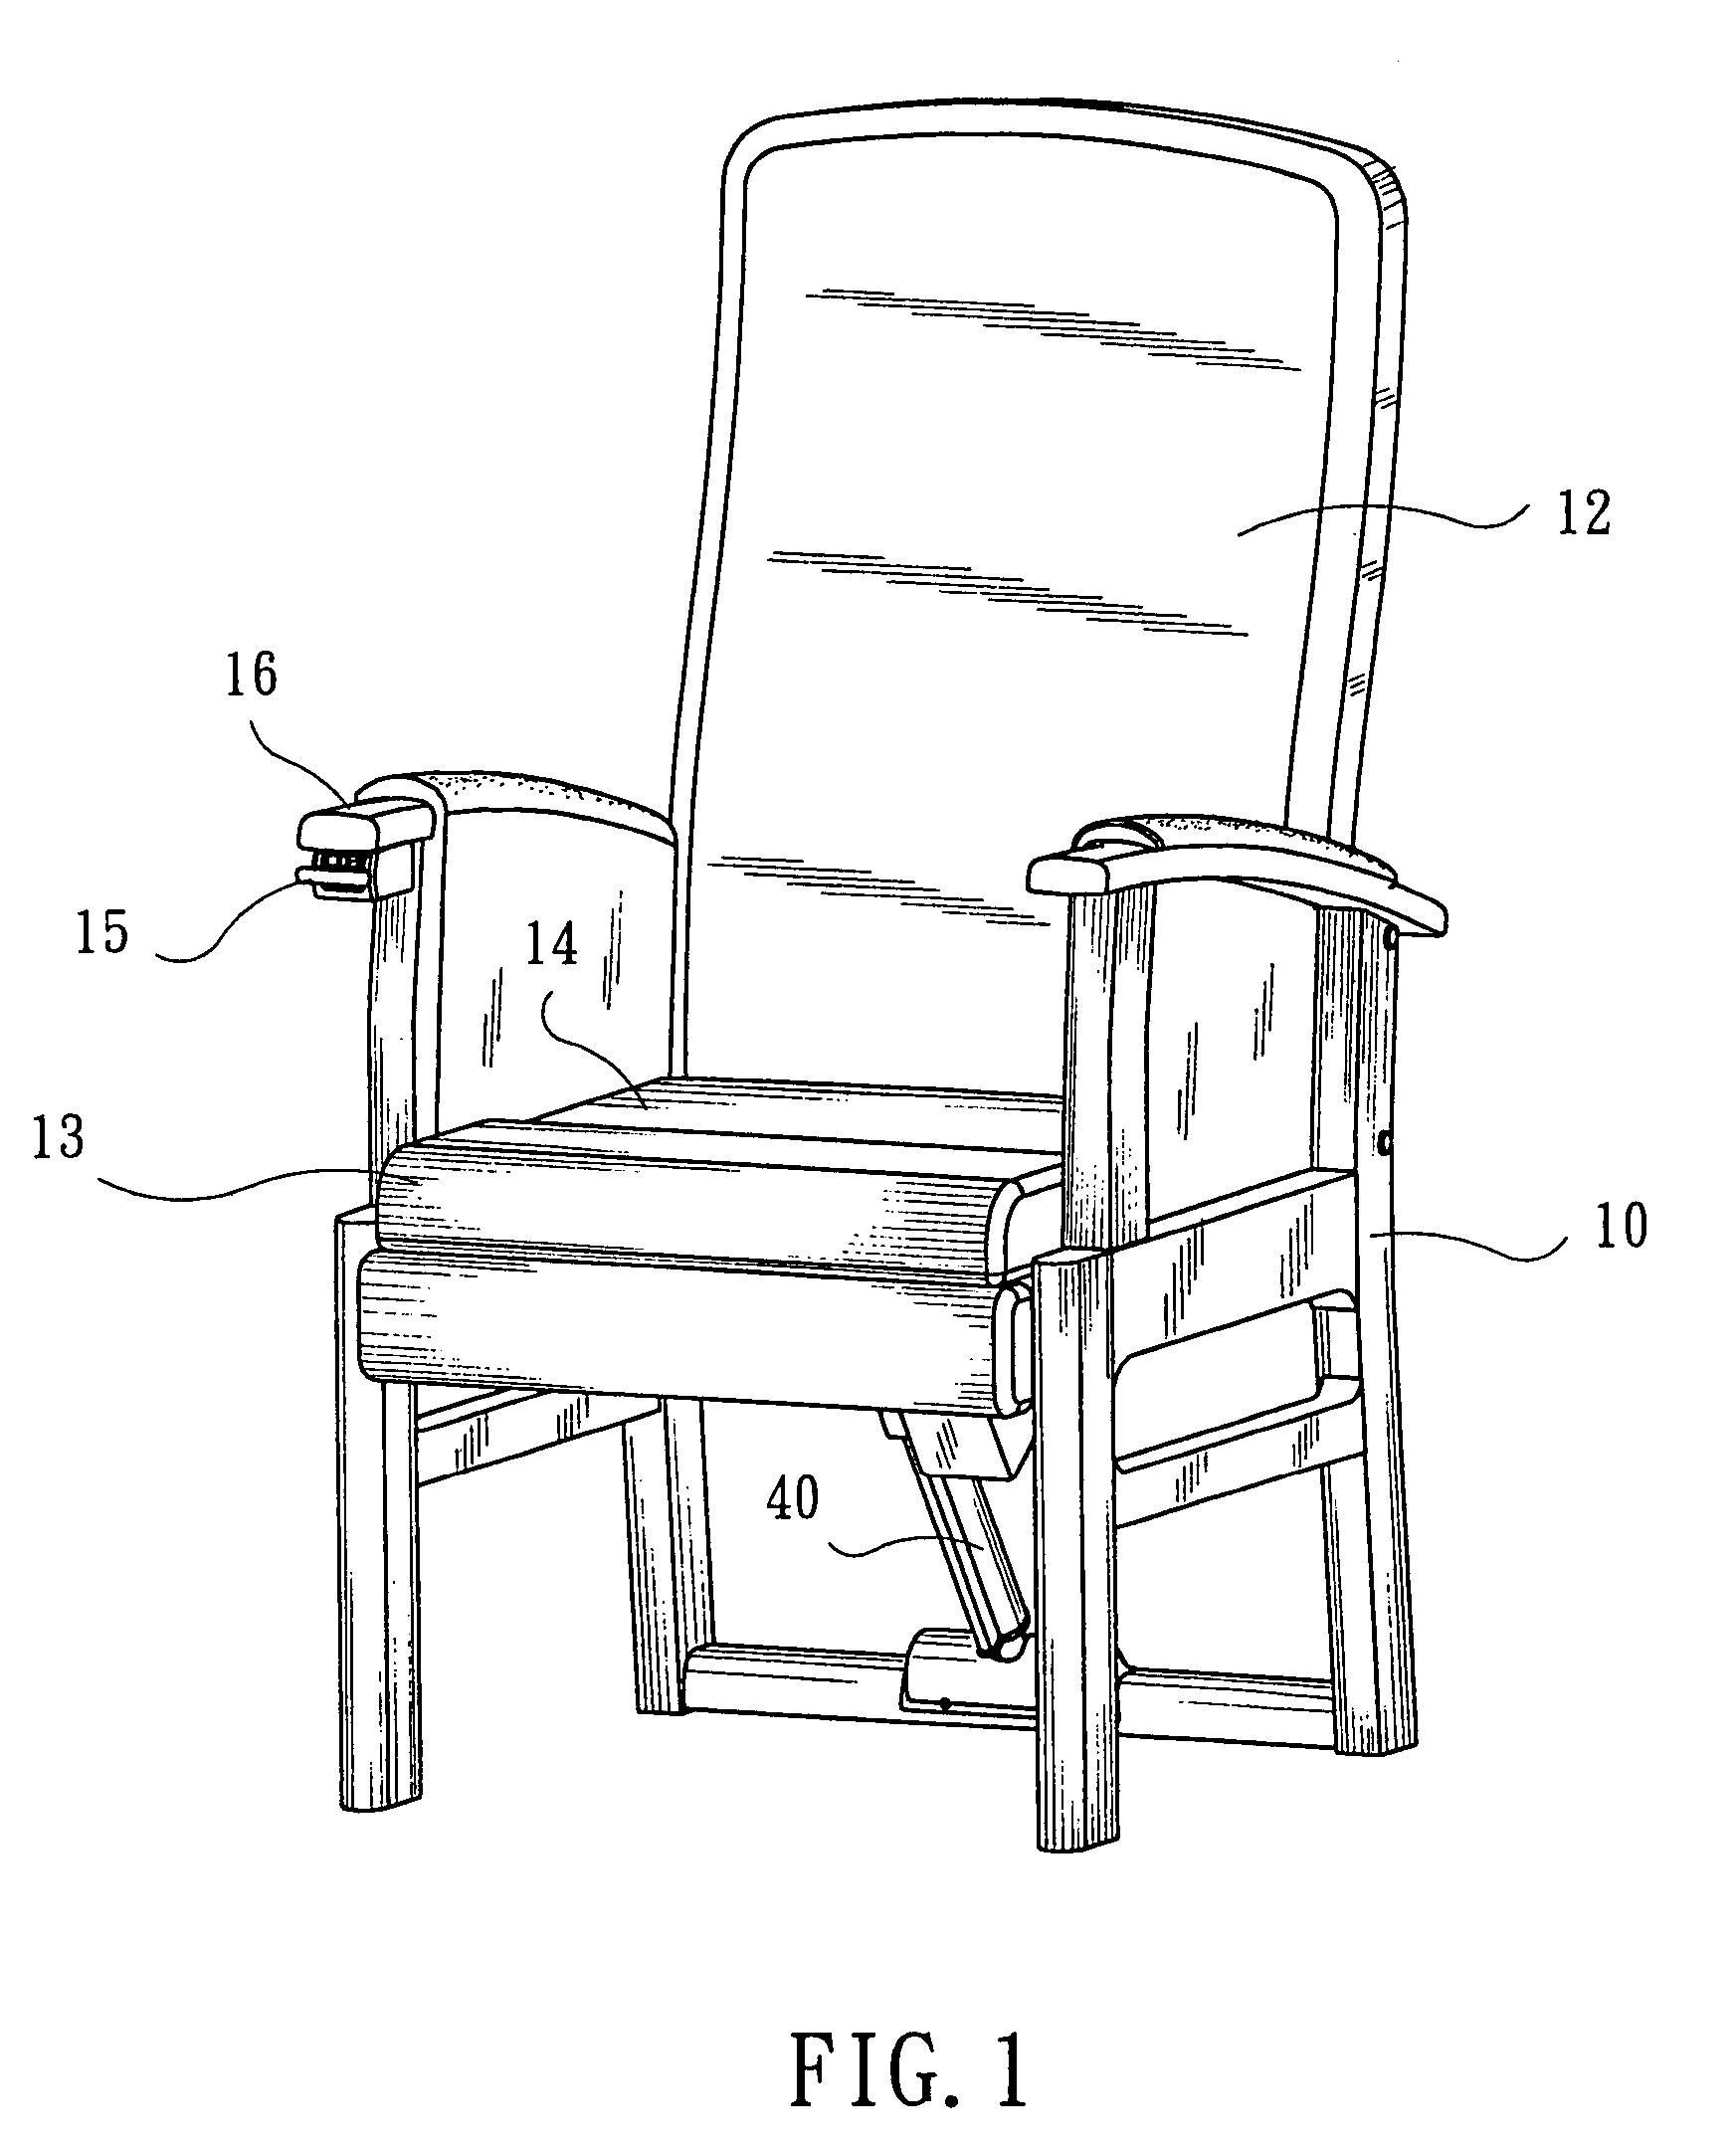 Seat elevating mechanism for chair